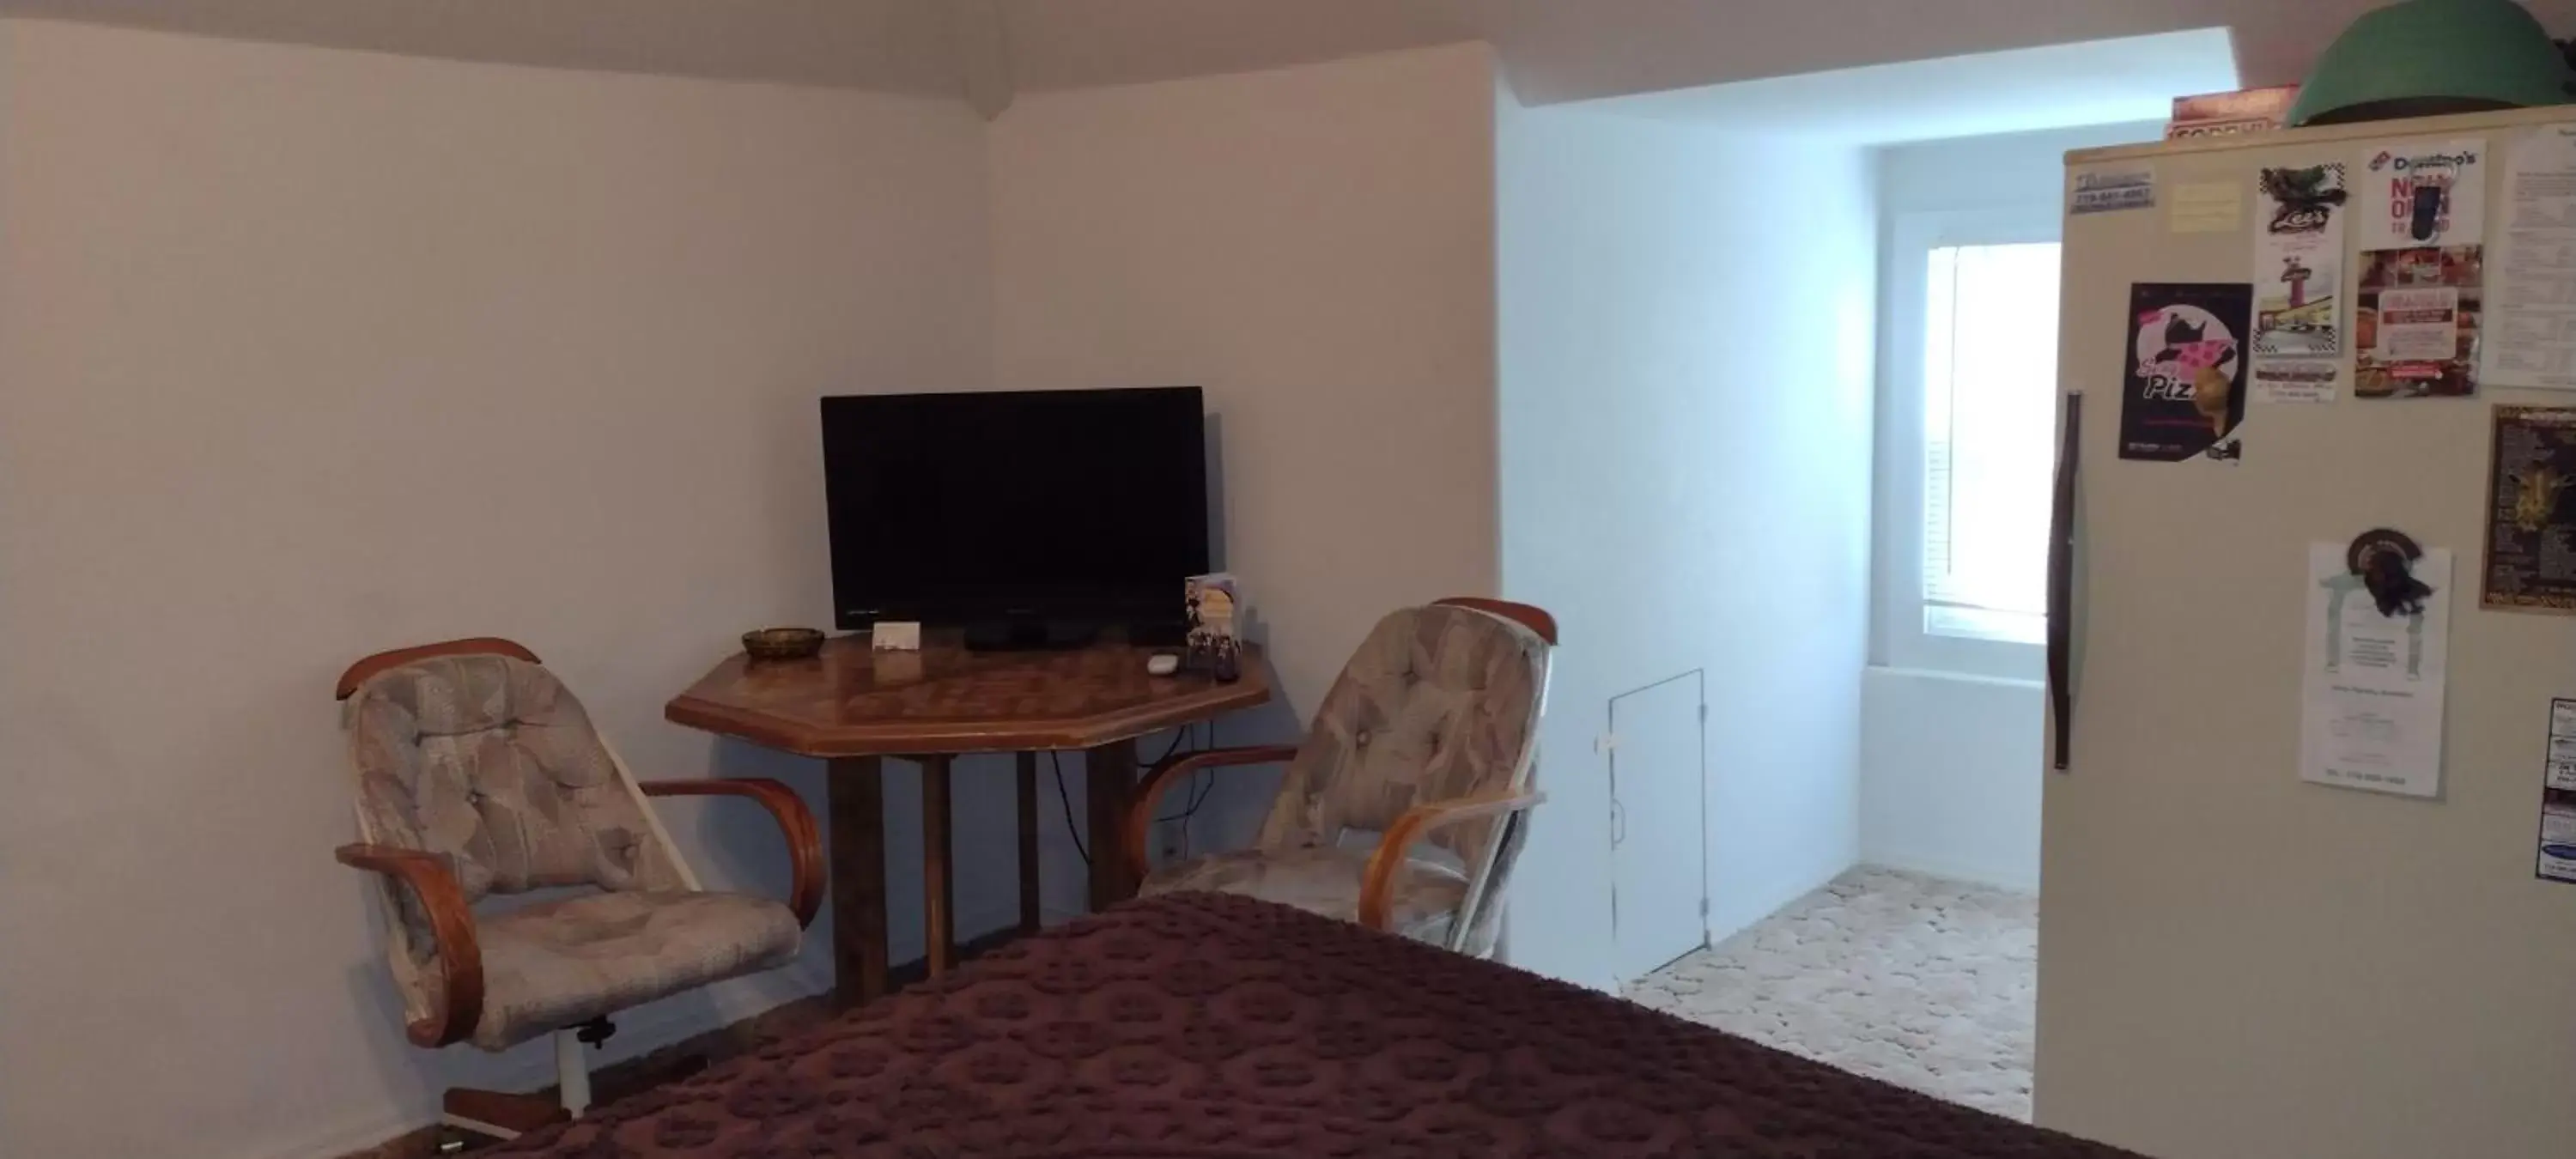 TV and multimedia, TV/Entertainment Center in Quiet upstairs studio close to town 420 friendly